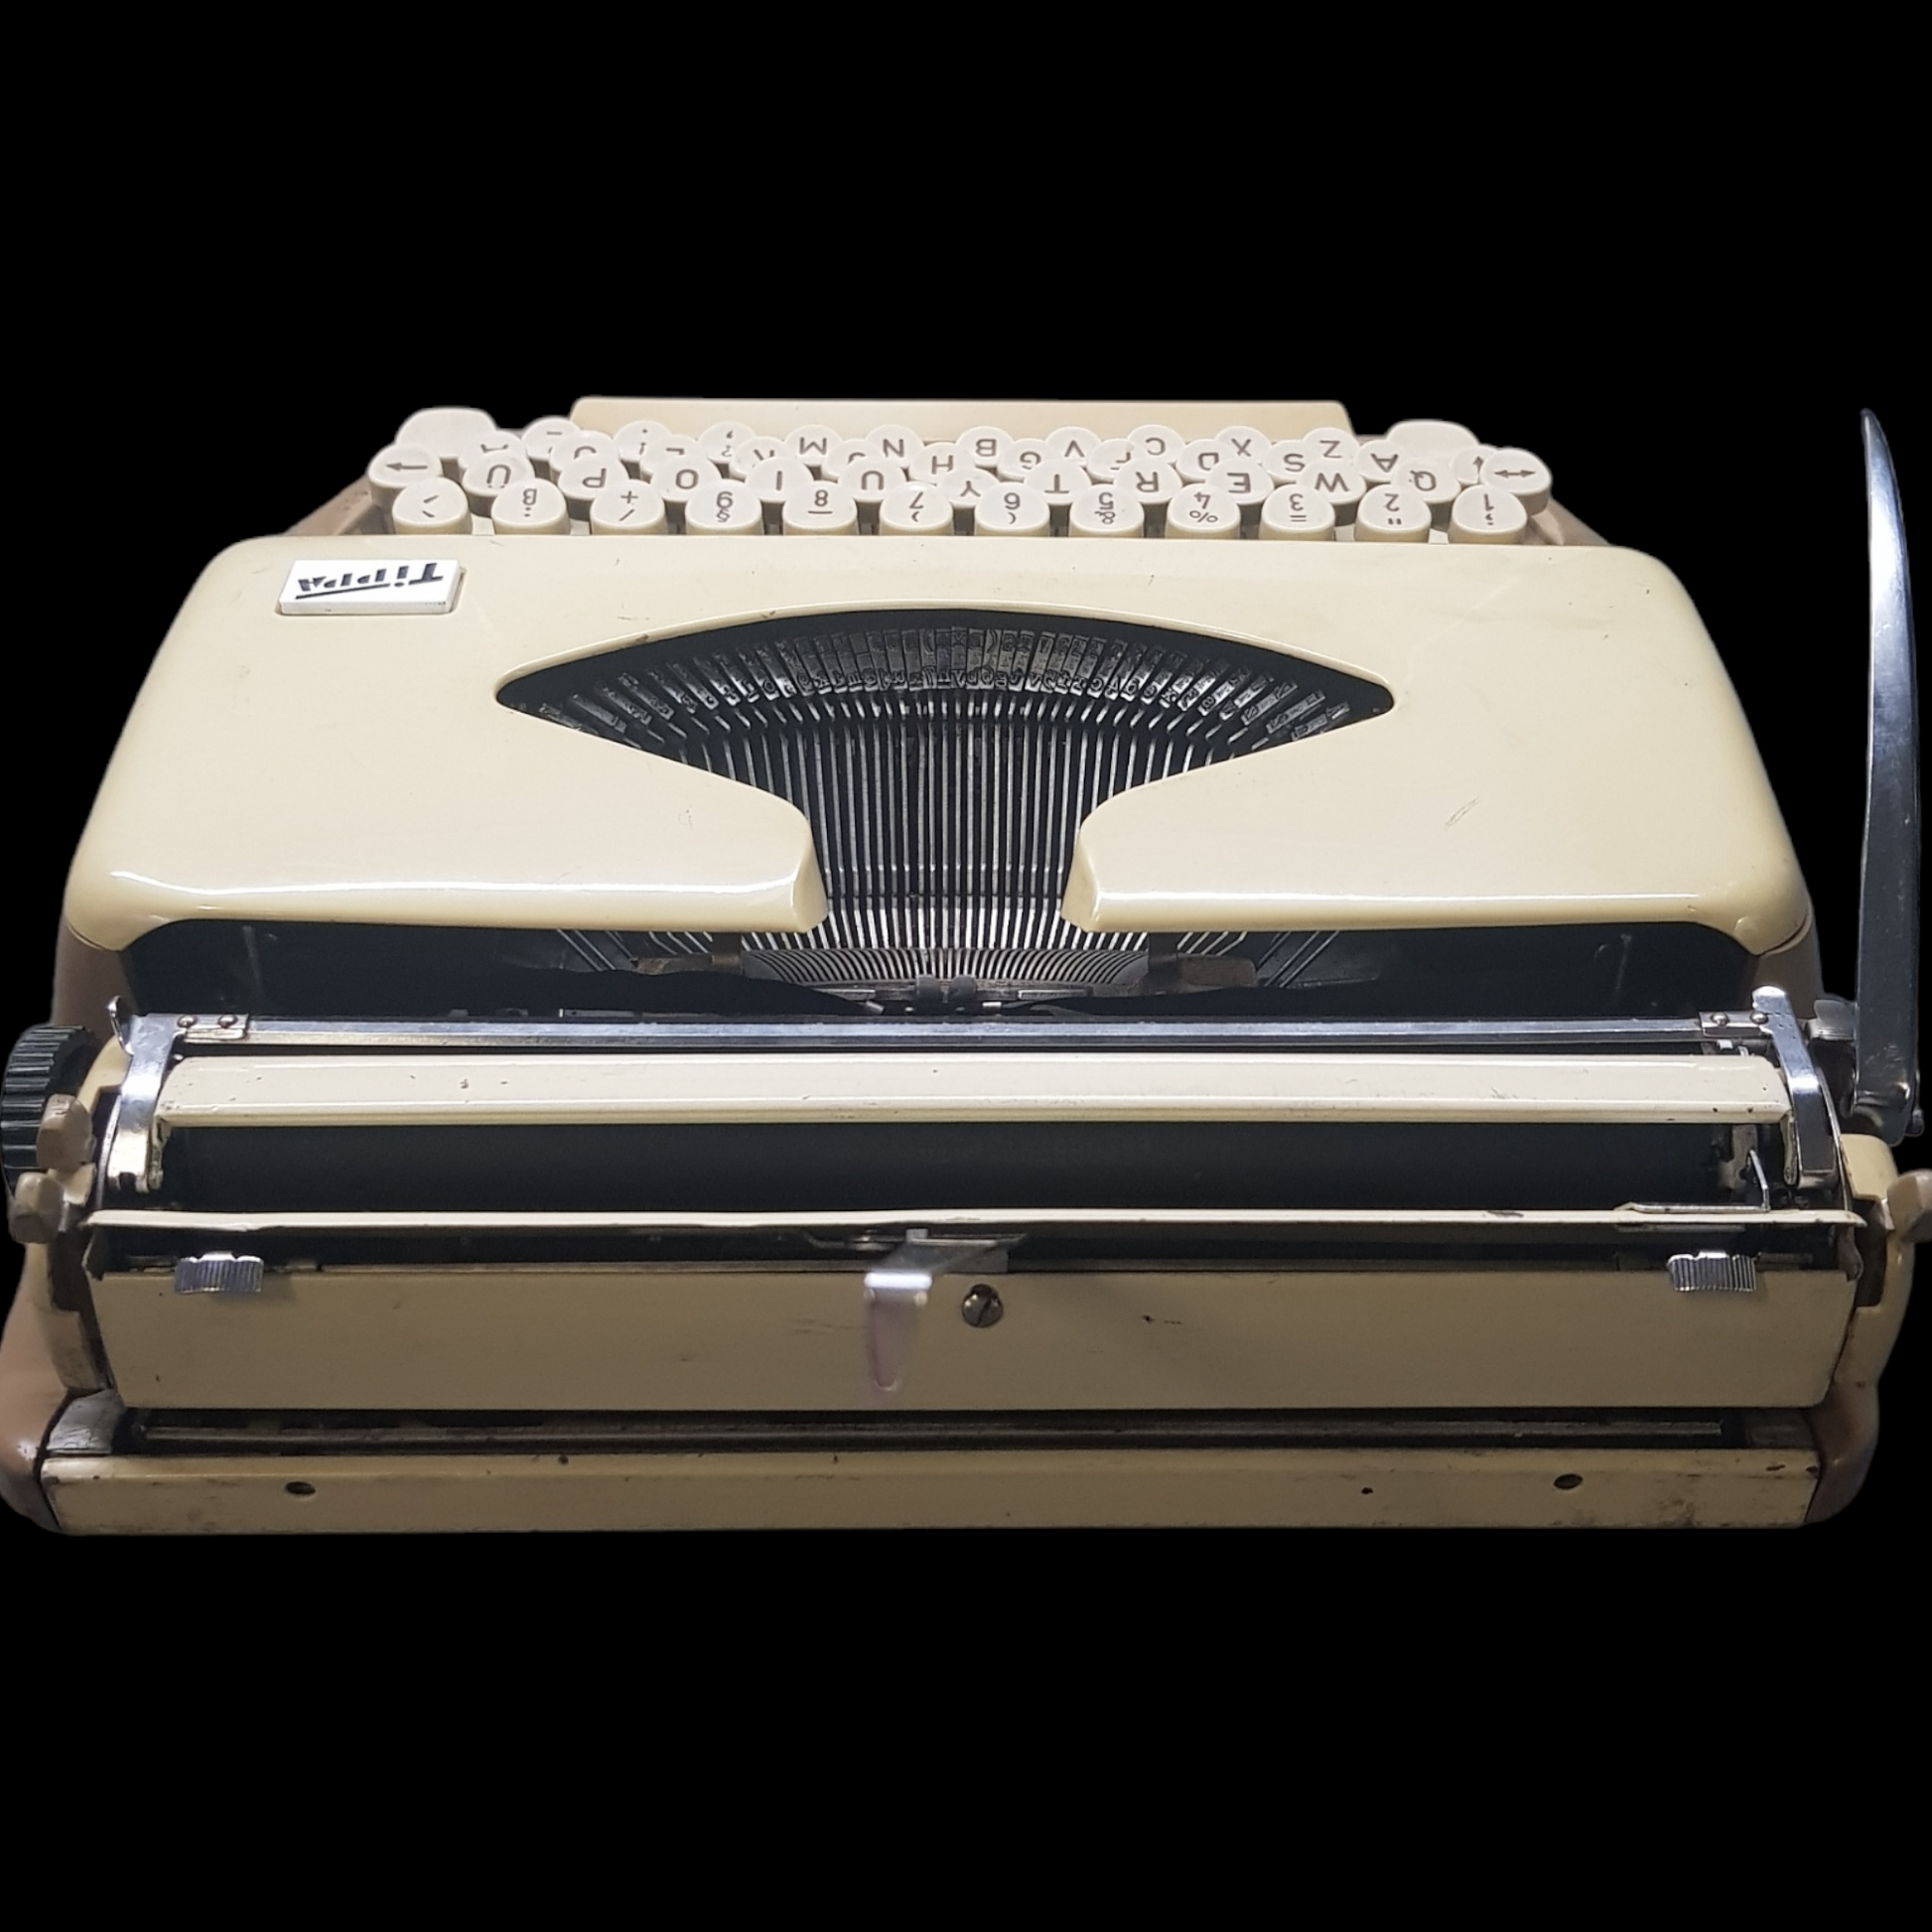 Image of Adler Tippa Portable Typewriter. Almost smallest portable typewriter. Made in Germany. Available from universaltypewritercompany.in